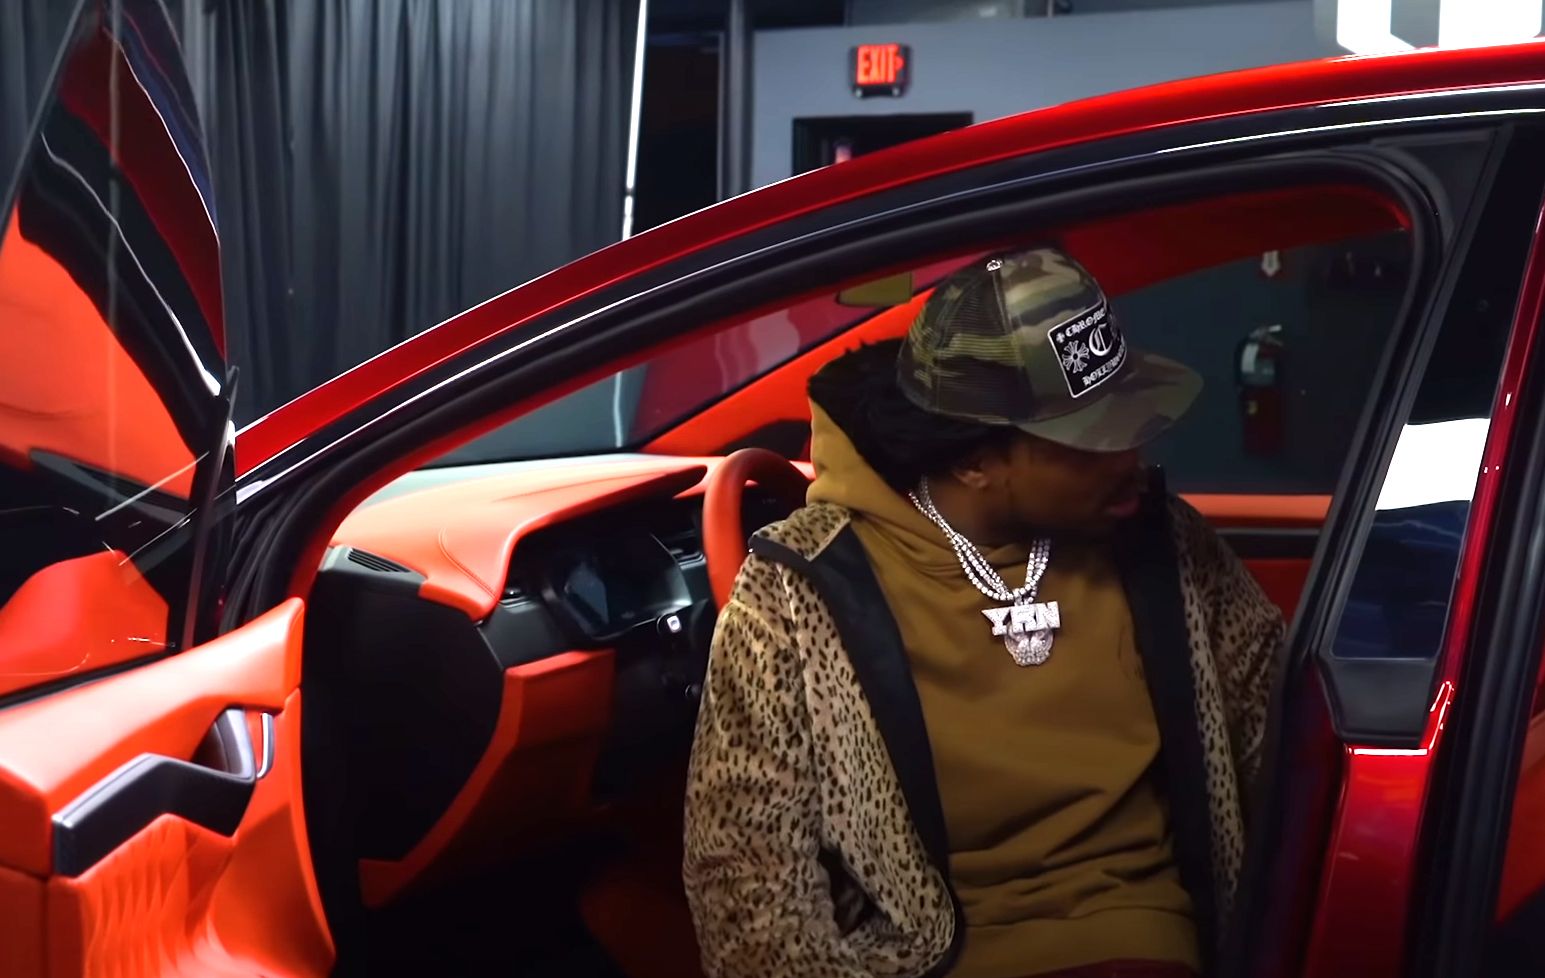 Quavo Huncho inspects the design work on his modded Tesla X